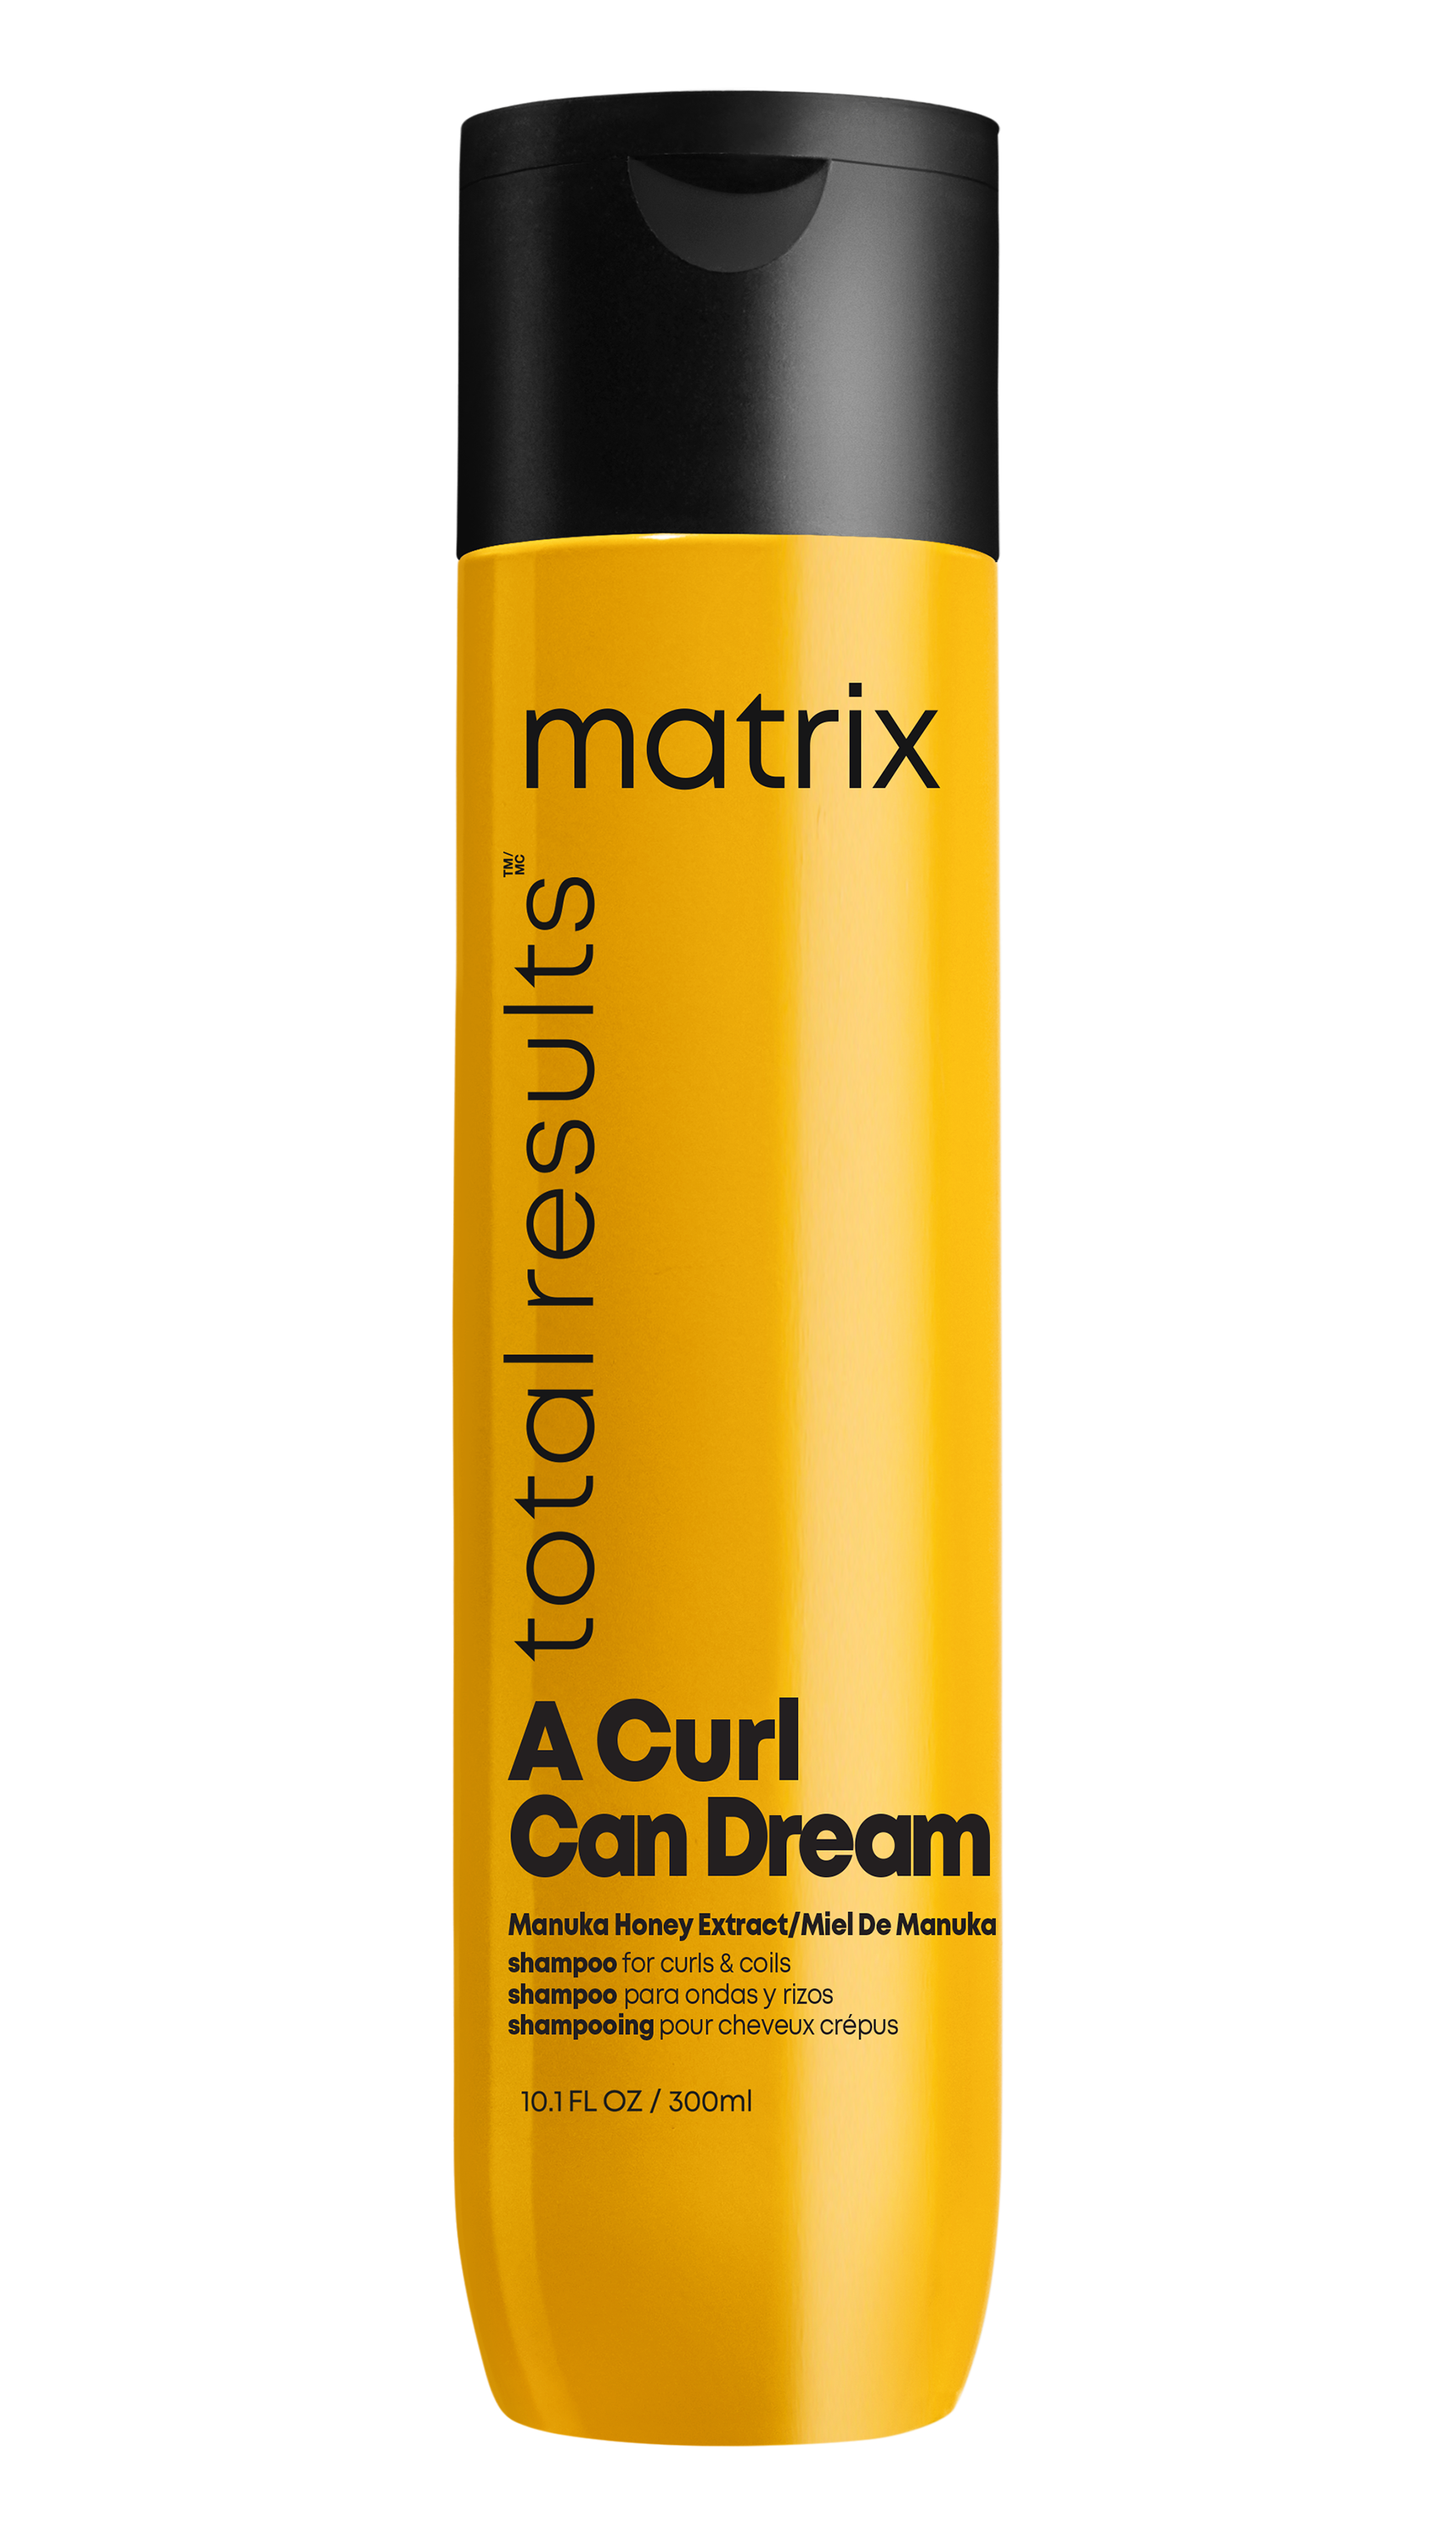 A Curl Can Dream Manuka Honey Extract Shampoo for curls & coils €13,60* - 300ml